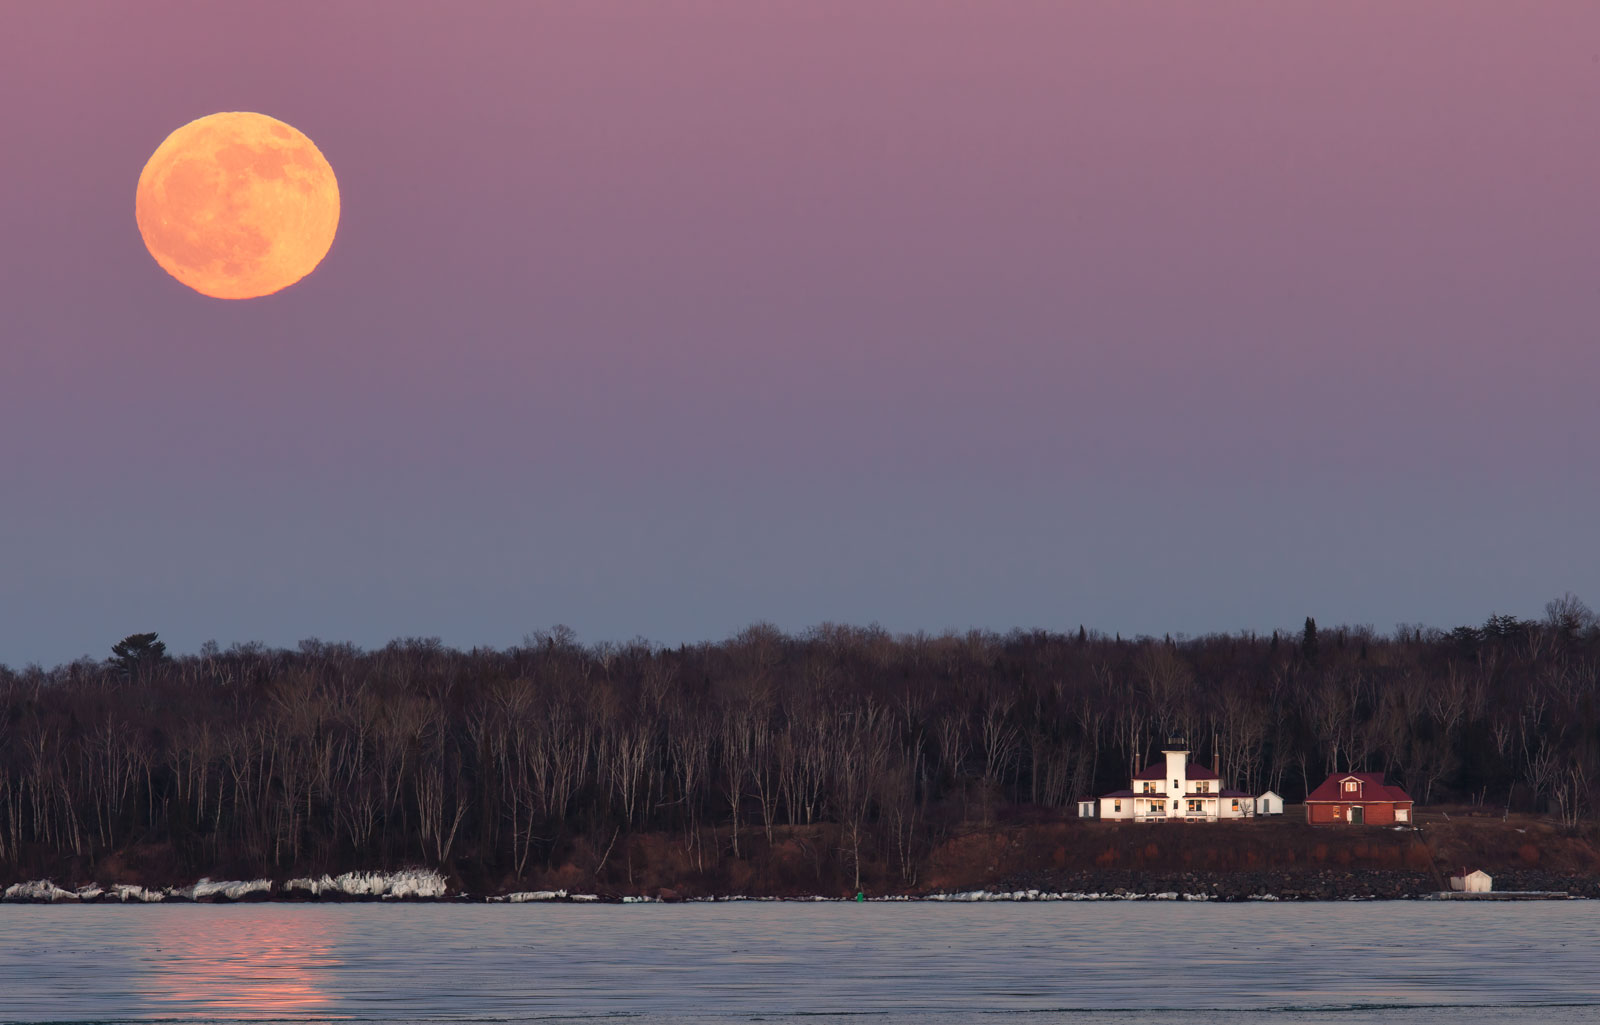 the full moon rises behind the raspberry island lighthouse in the apostle islands on lake superior.